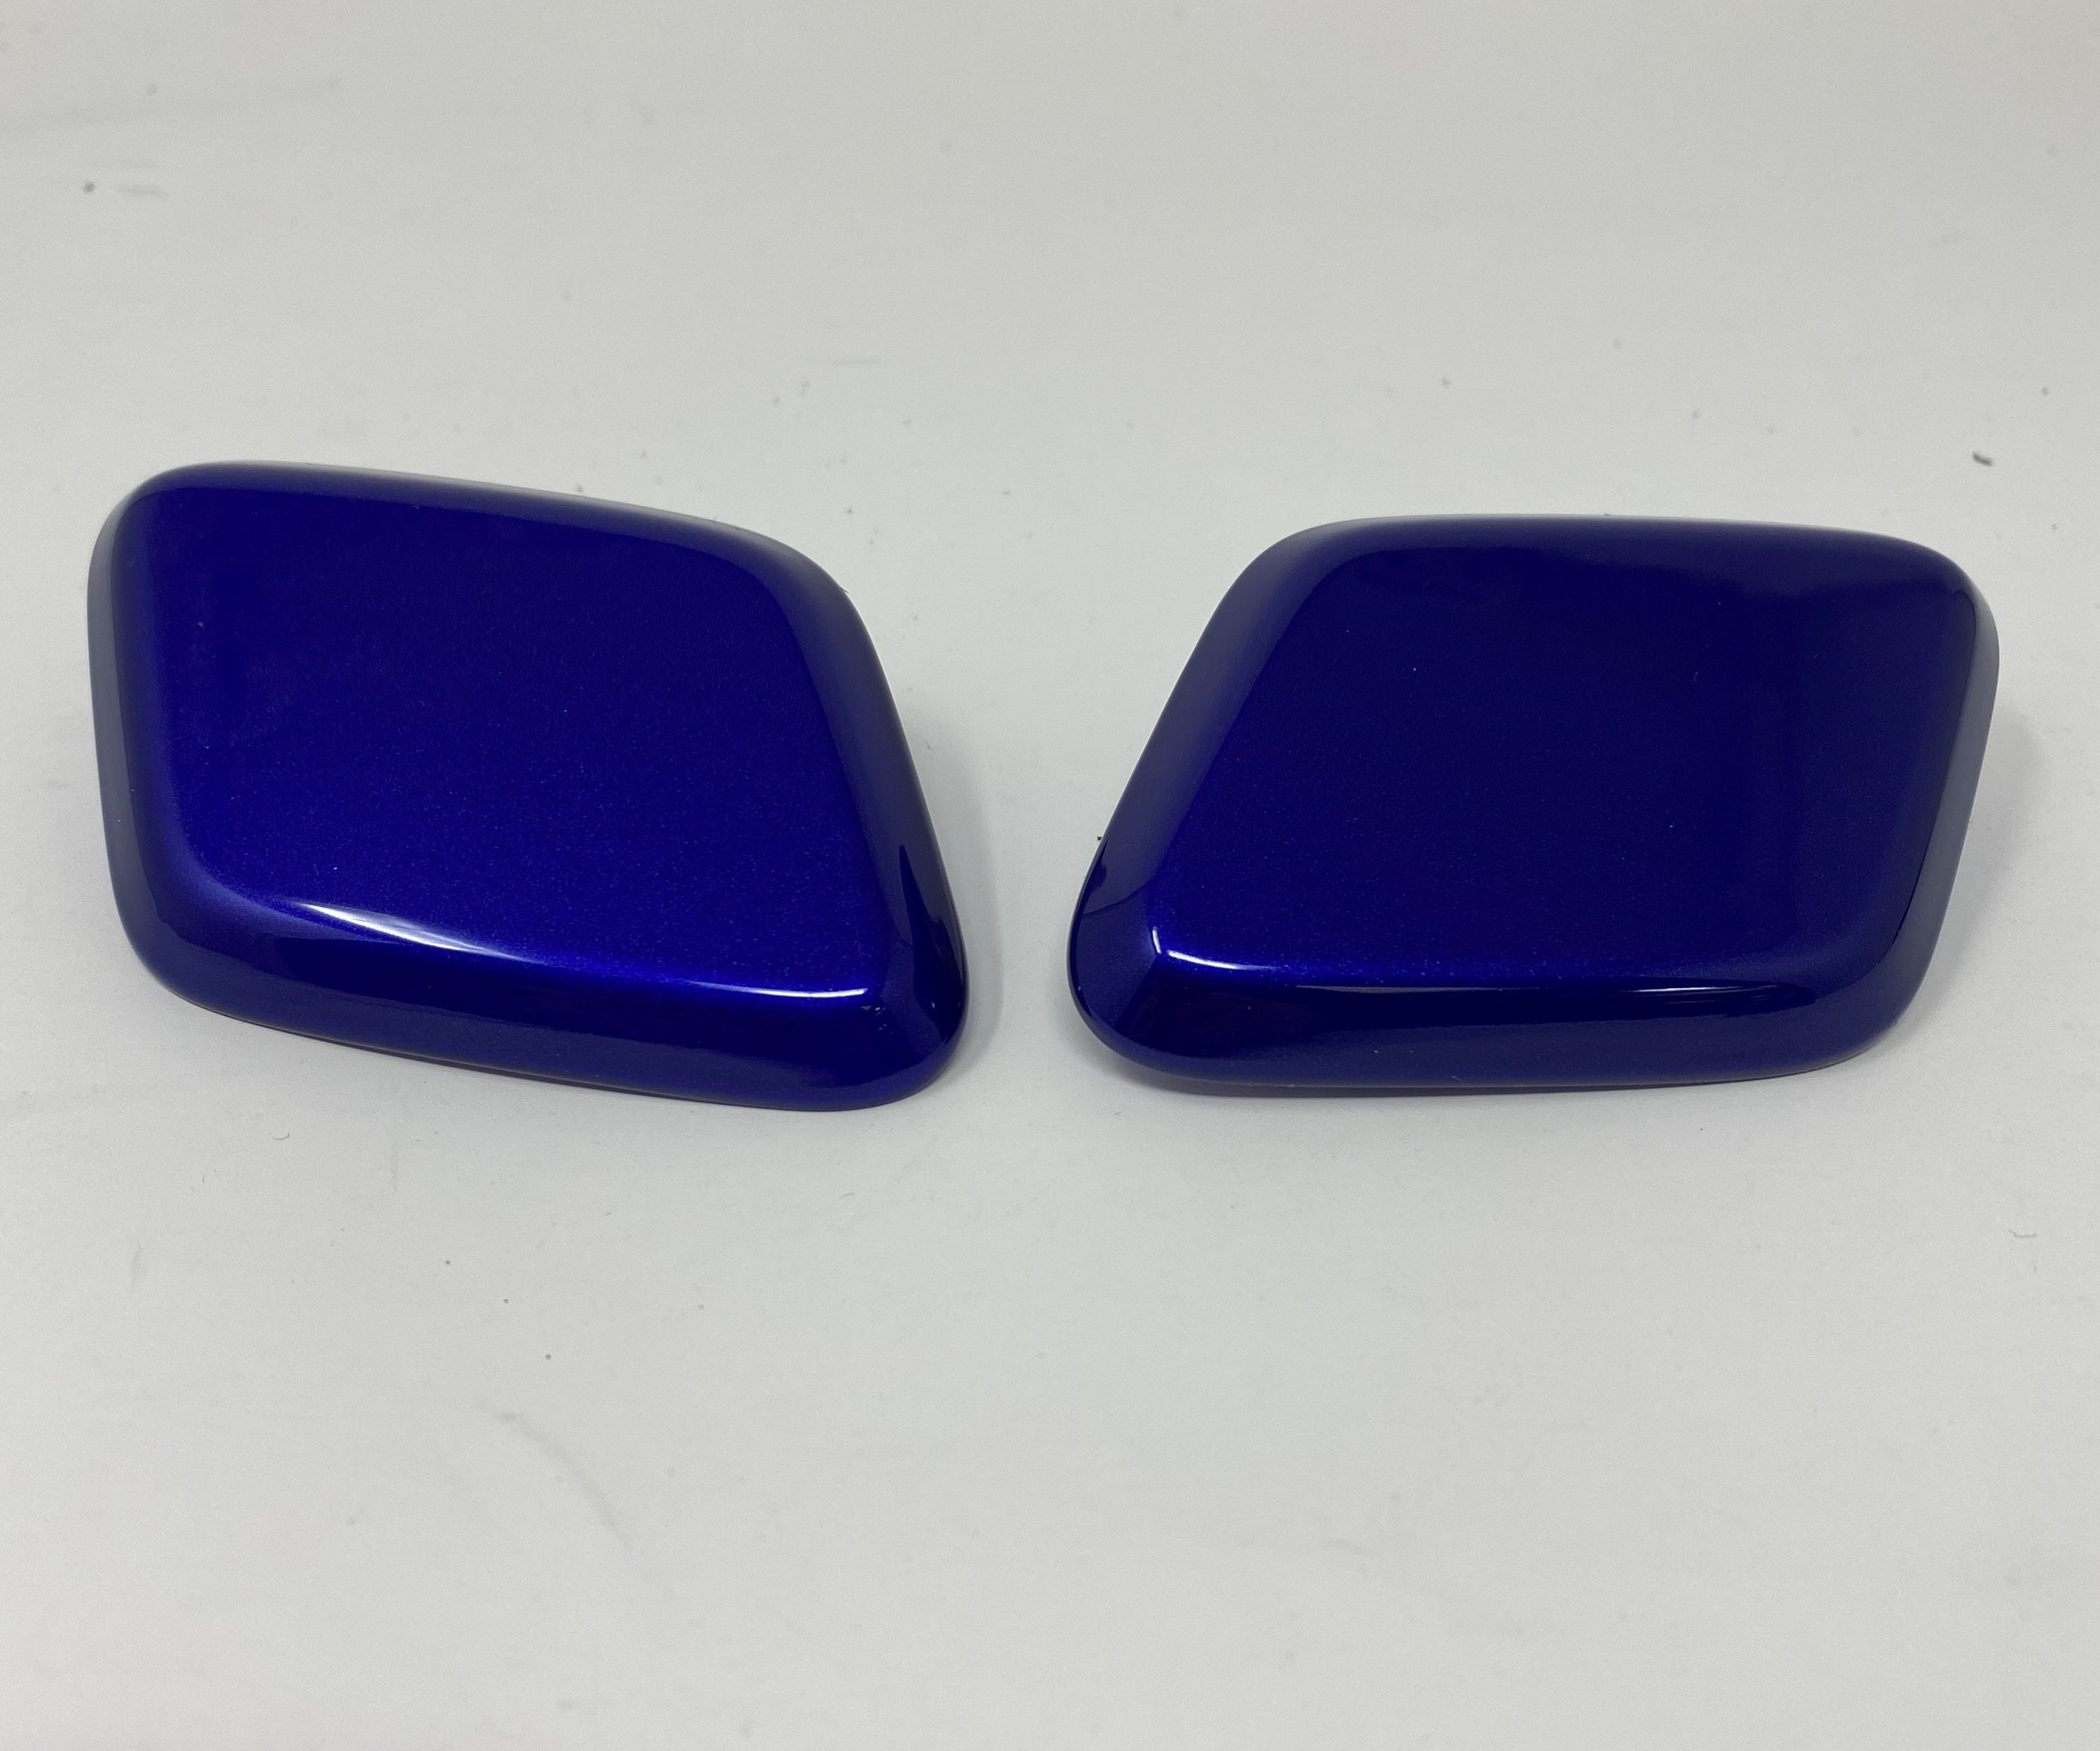 Genuine Ford Headlight Washer Covers - Mk3 (Pre-Facelift) Ford Focus ST